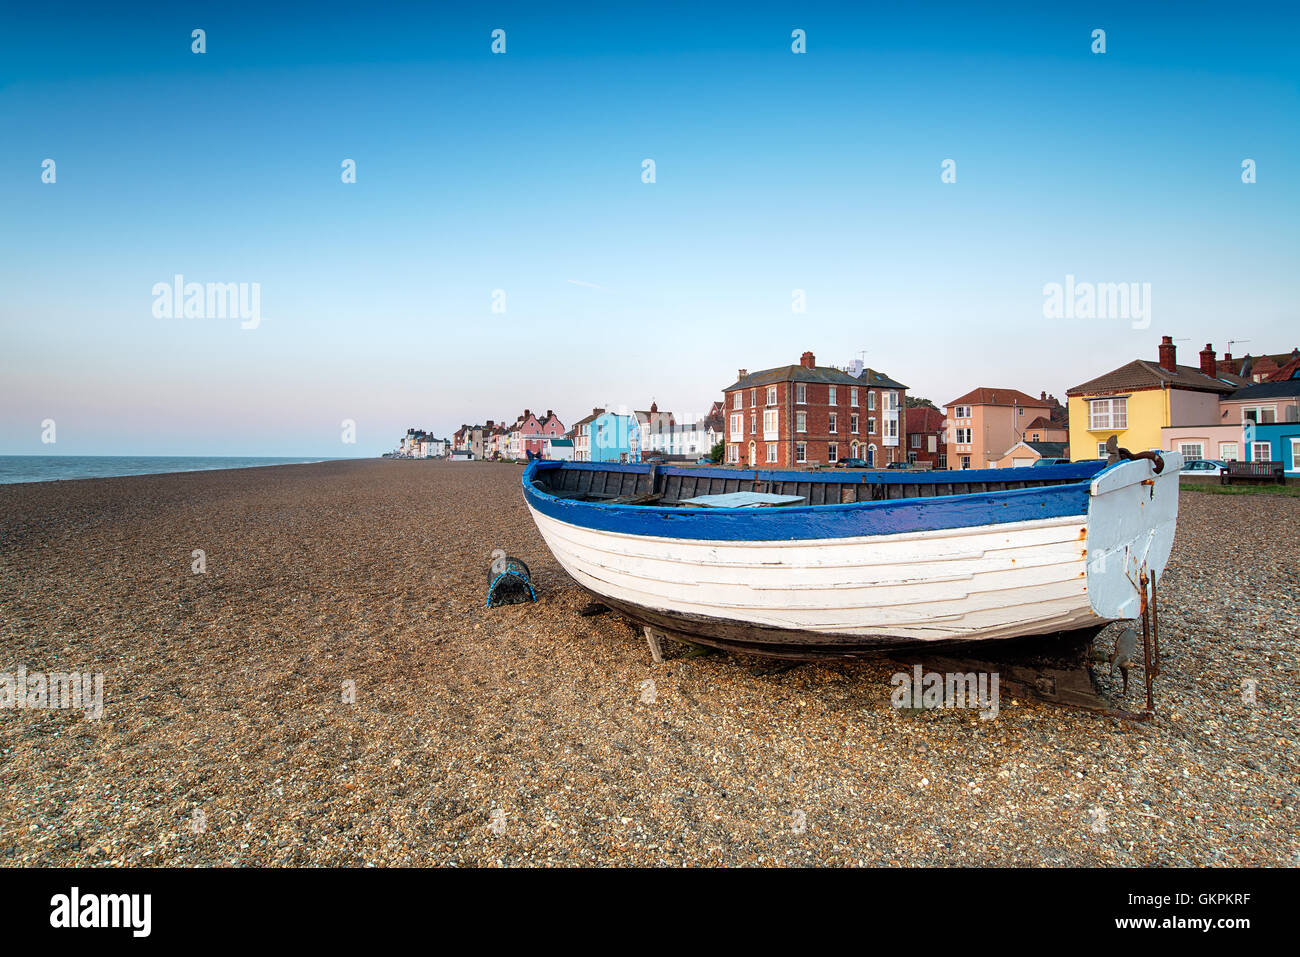 Fishing boats on the beach at Aldeburgh on the Suffolk coast Stock Photo